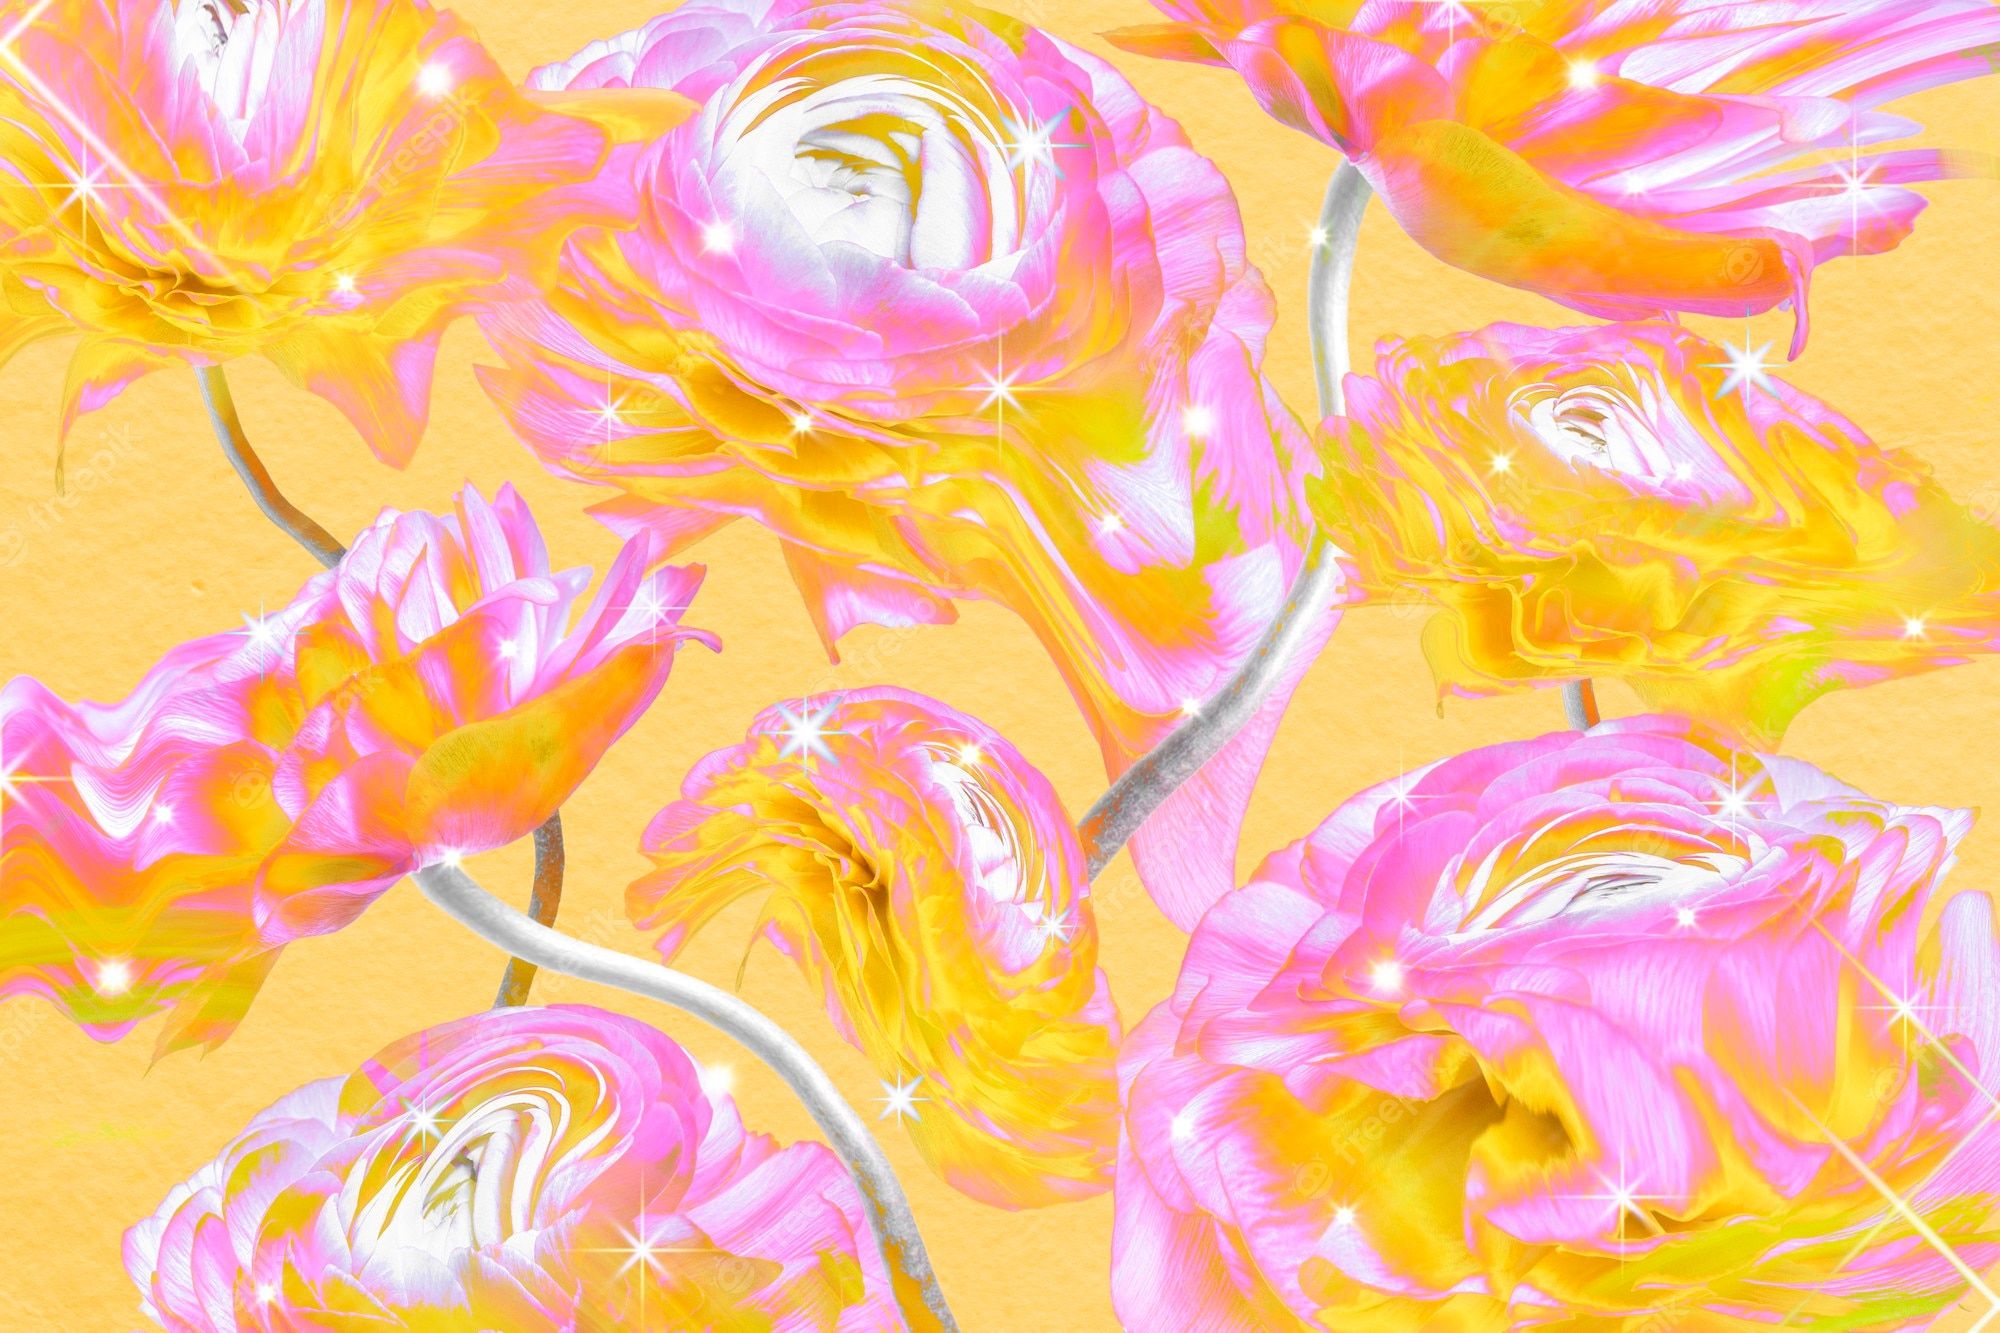 An abstract image of pink and yellow flowers on an orange background - Trippy